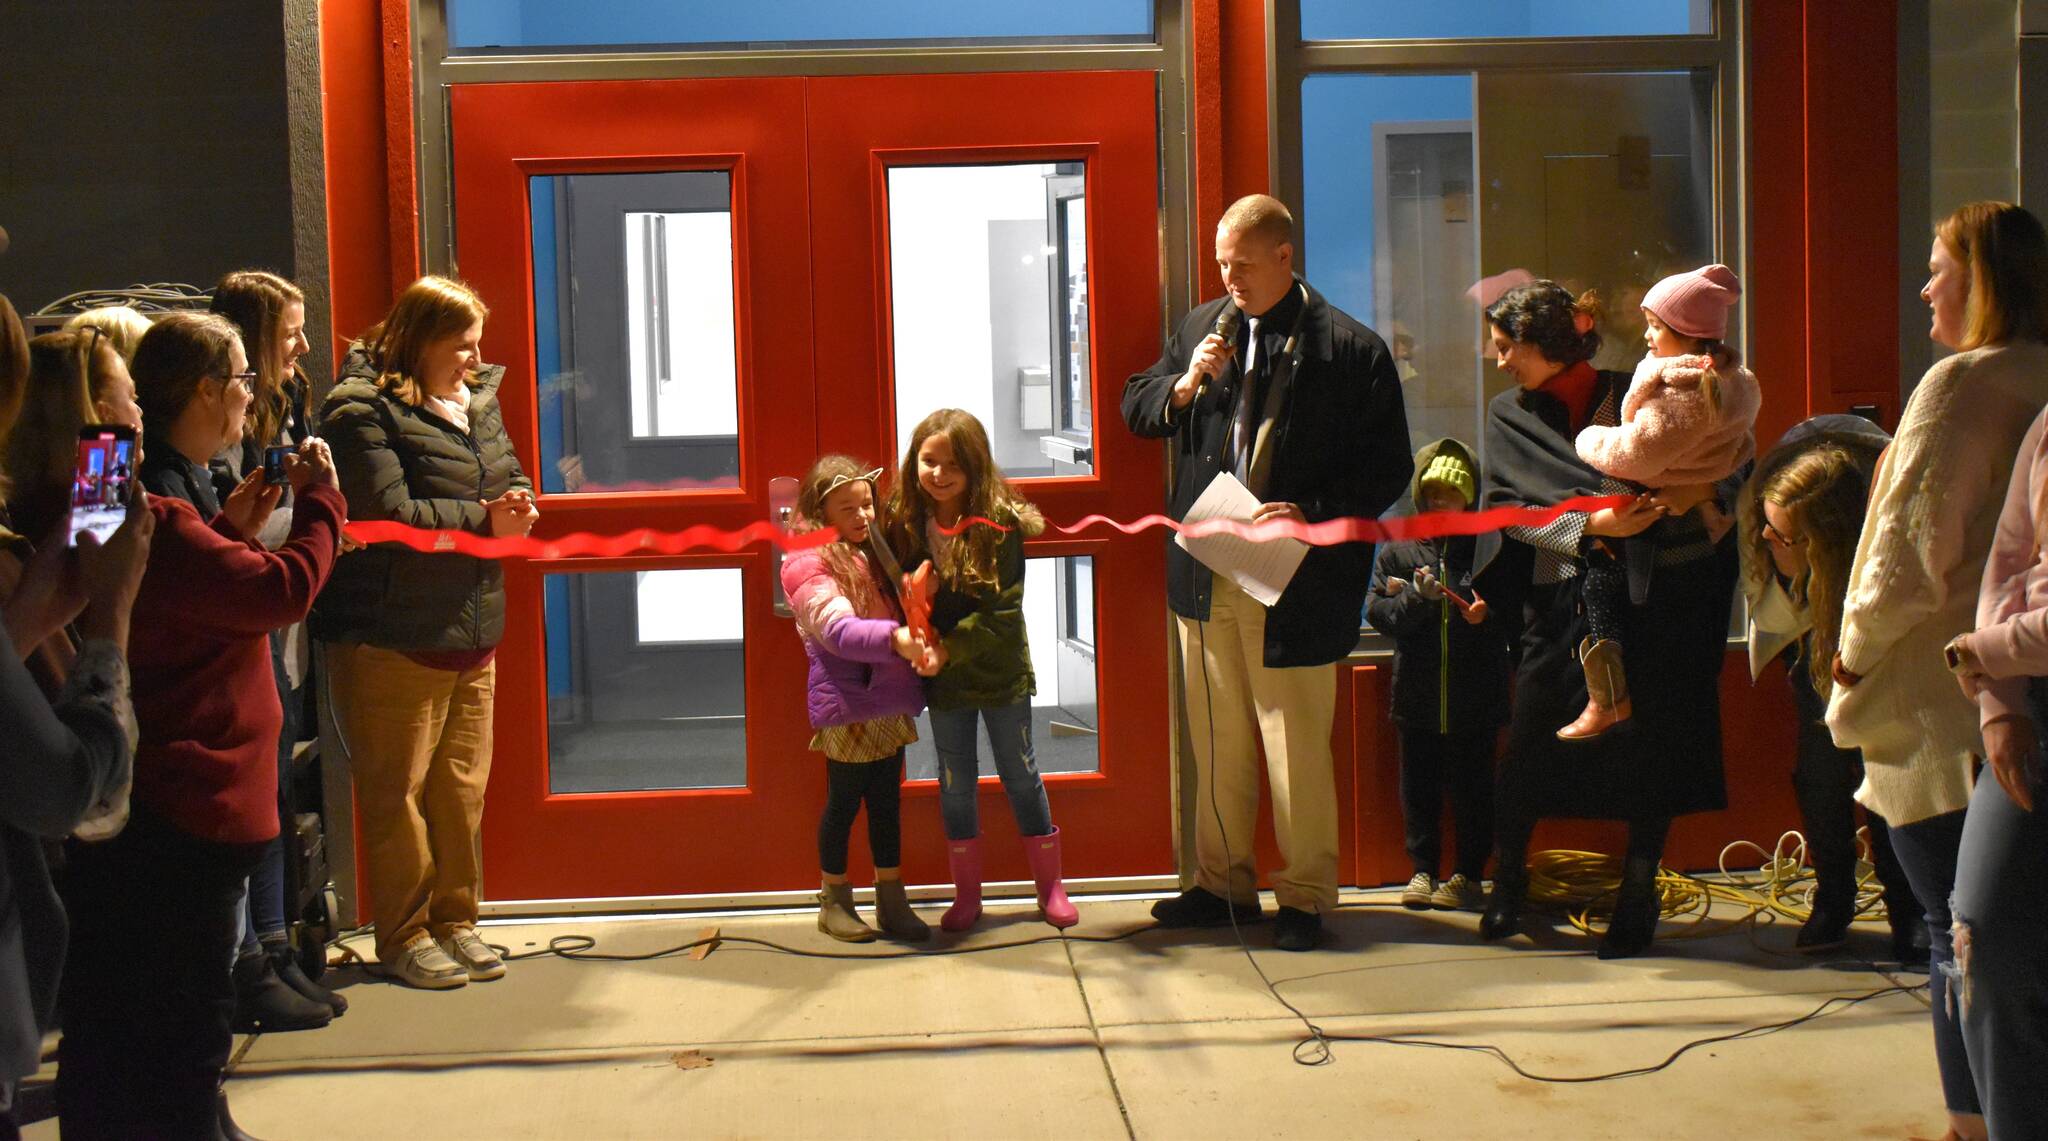 Allen Leister / The Daily World 
After nearly a year of construction, dozens of families gathered around as two children cut the ceremonial ribbon during the formal opening of the new Oakville Elementary School on Wednesday, Nov. 9, in Oakville.